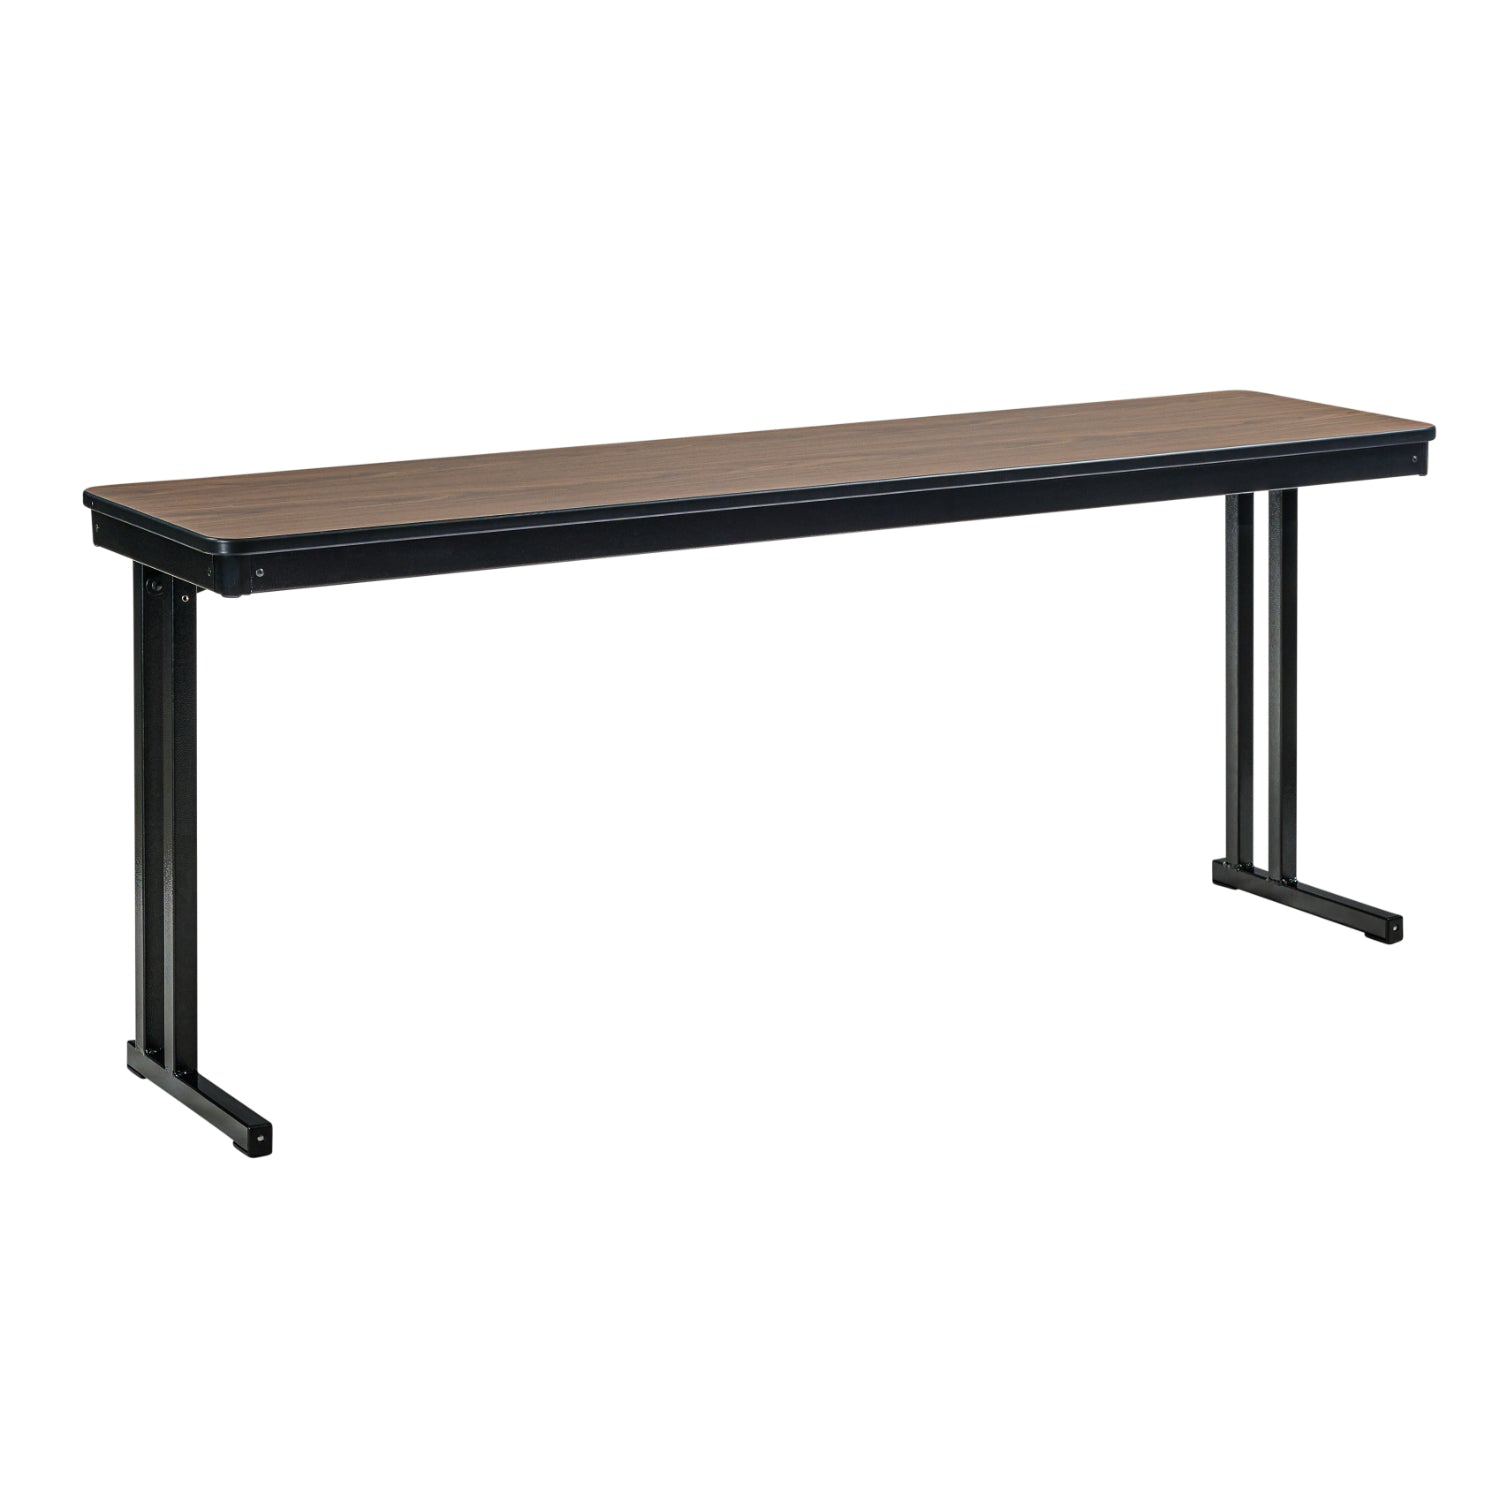 Max Seating Folding Training and Seminar Table with Cantilever Legs, 18" x 60", High Pressure Laminate Top with Particleboard Core/T-Mold Edge